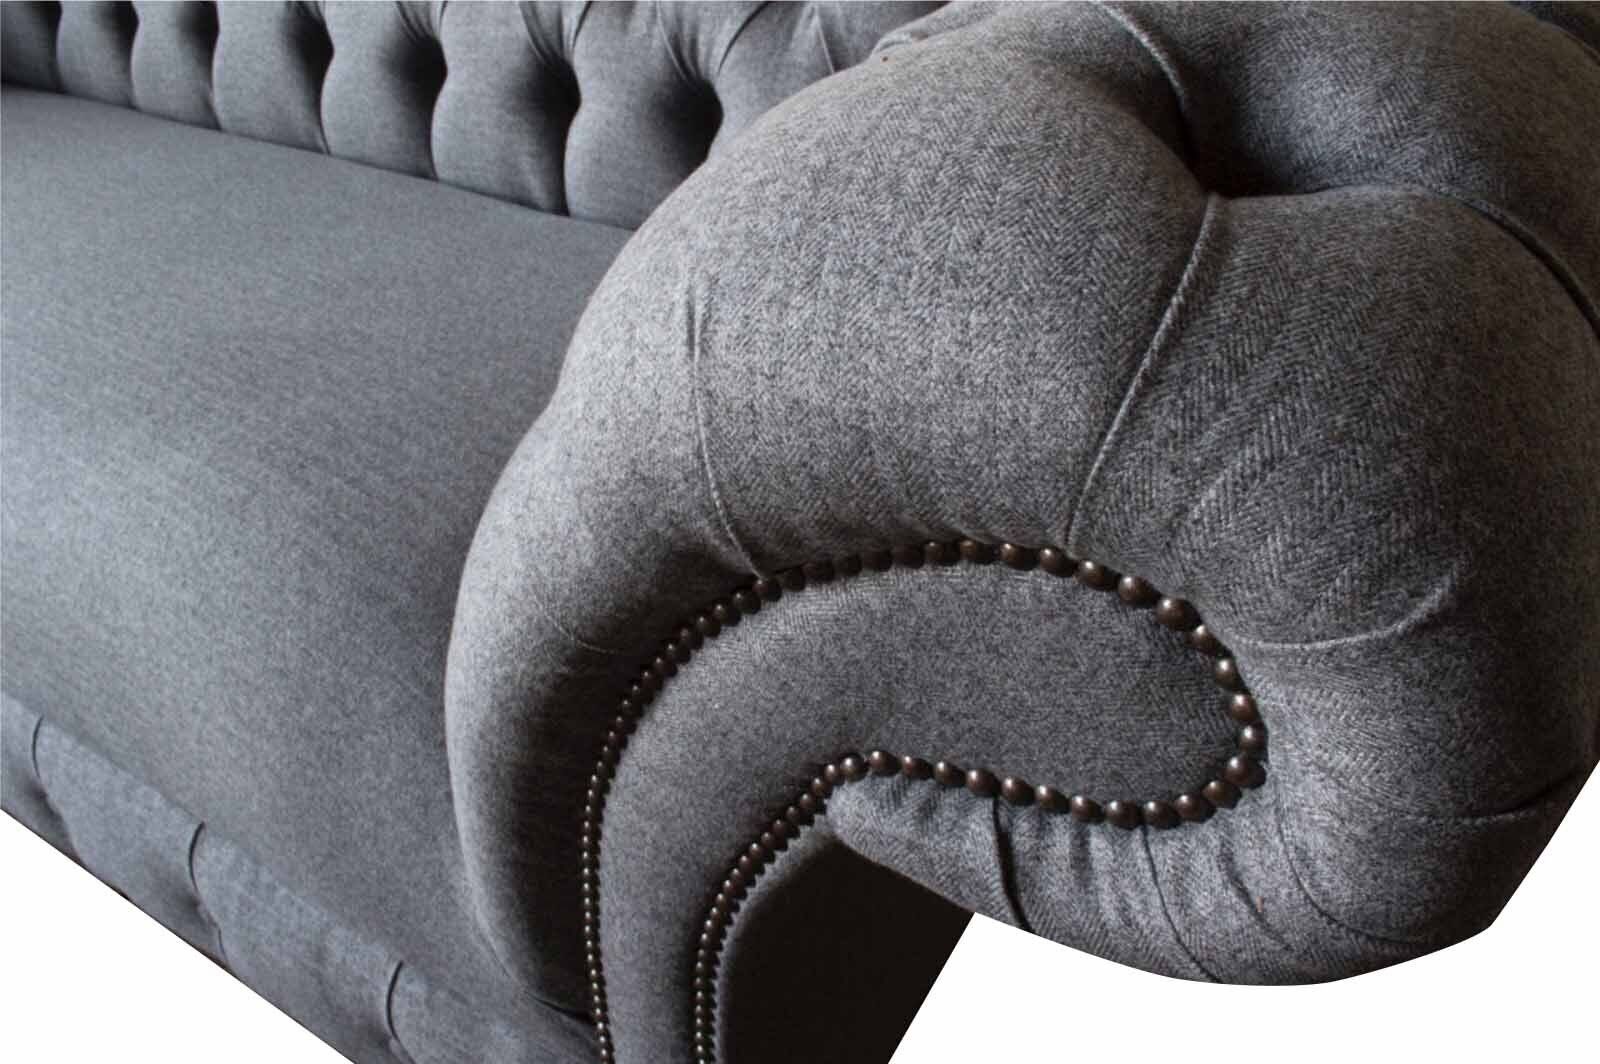 Europe Couch Luxus Chesterfield Couchen Made Sofas, Textil JVmoebel Sitzer in Sofa 3 Polster Sofa